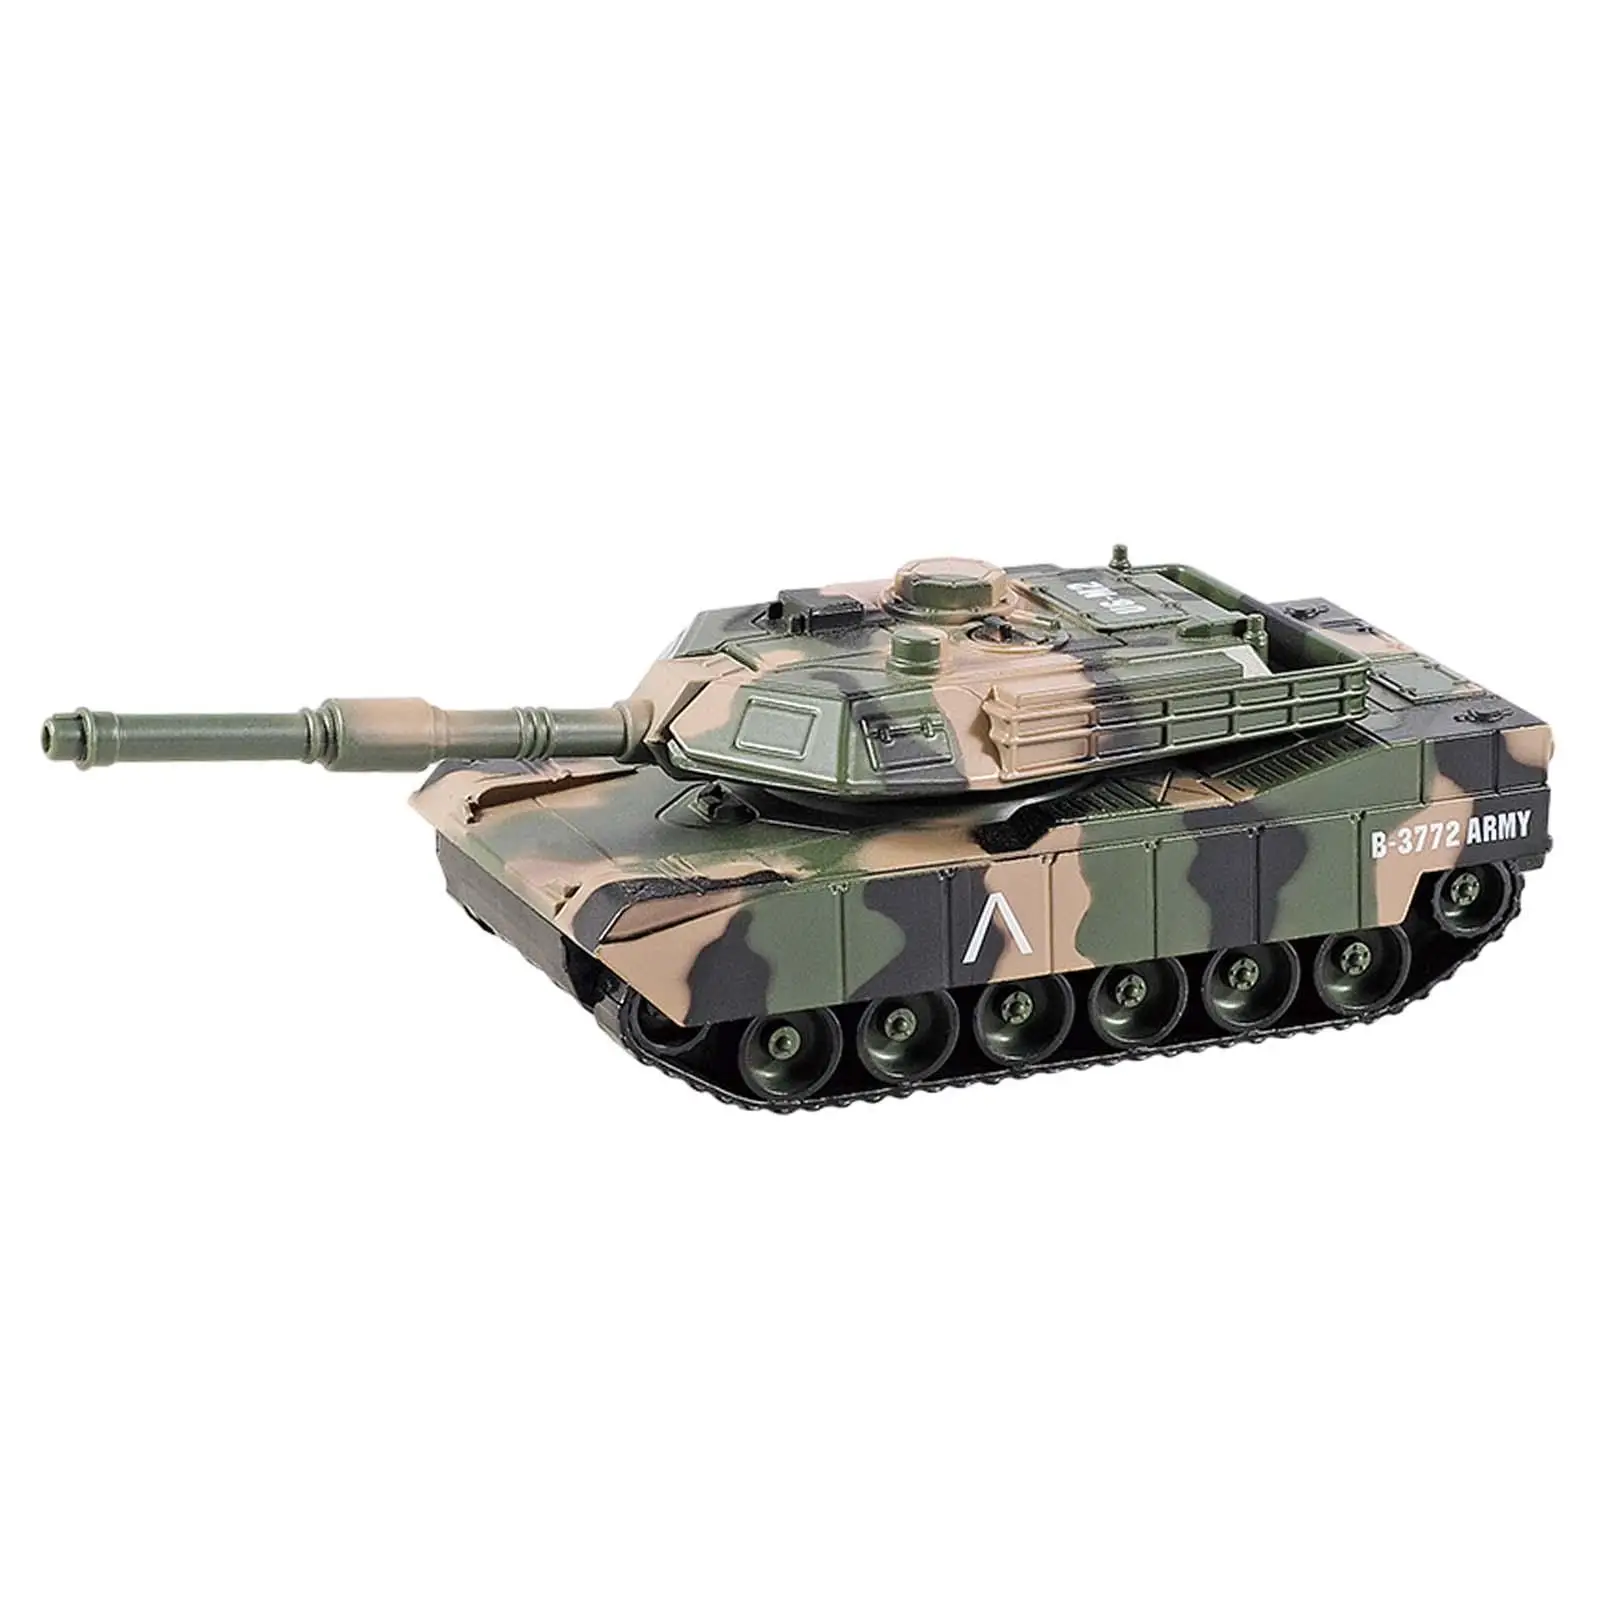 1:24 Tank Toy with Light and Sound Vehicle for Boys 3-7 Years Old Gift